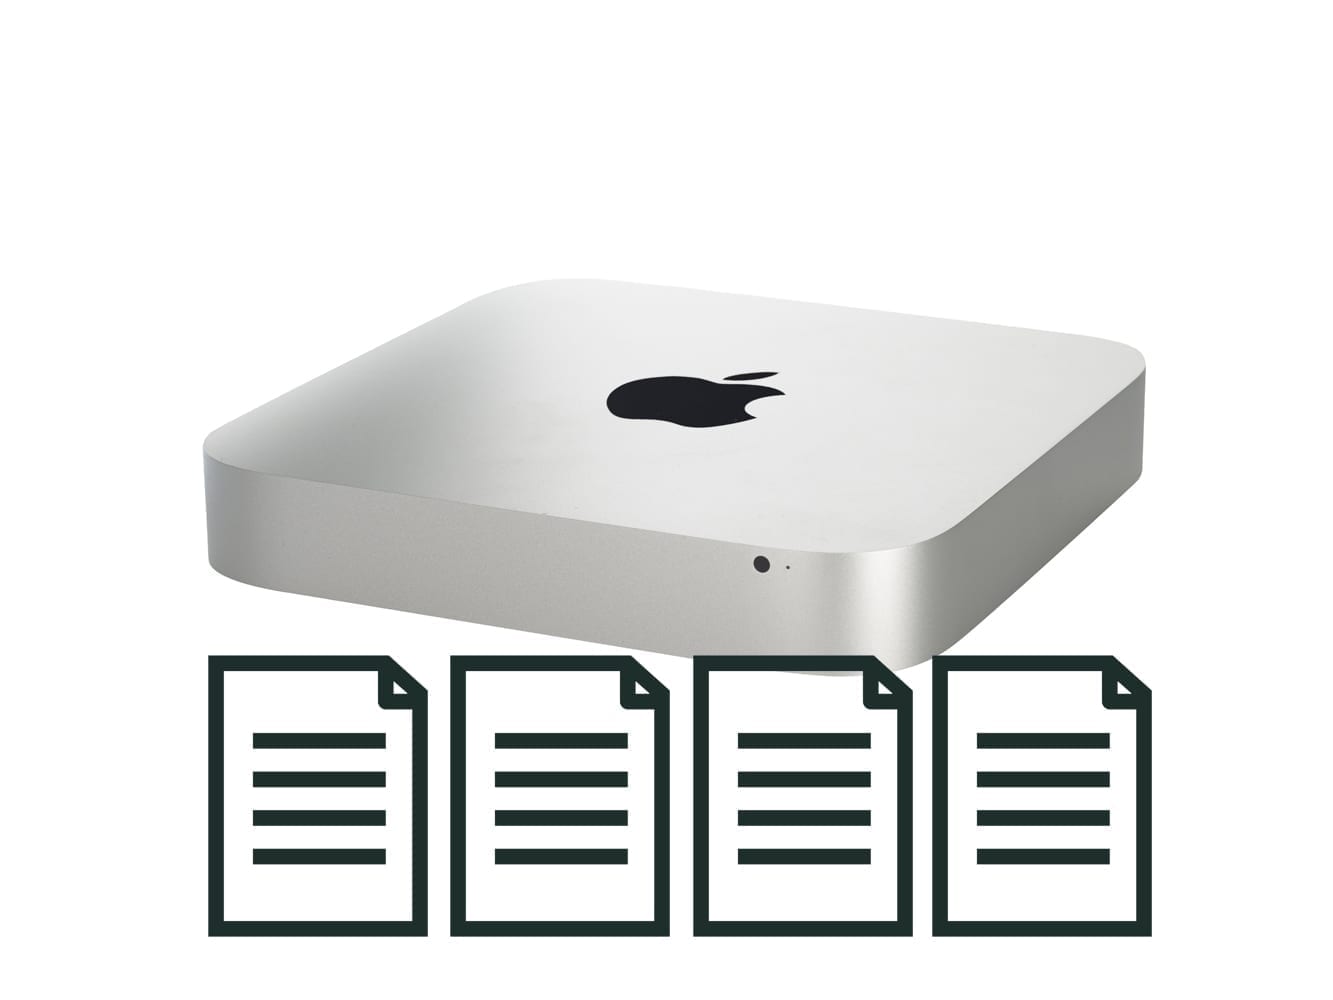 How to share Files from the macOS Server 2011